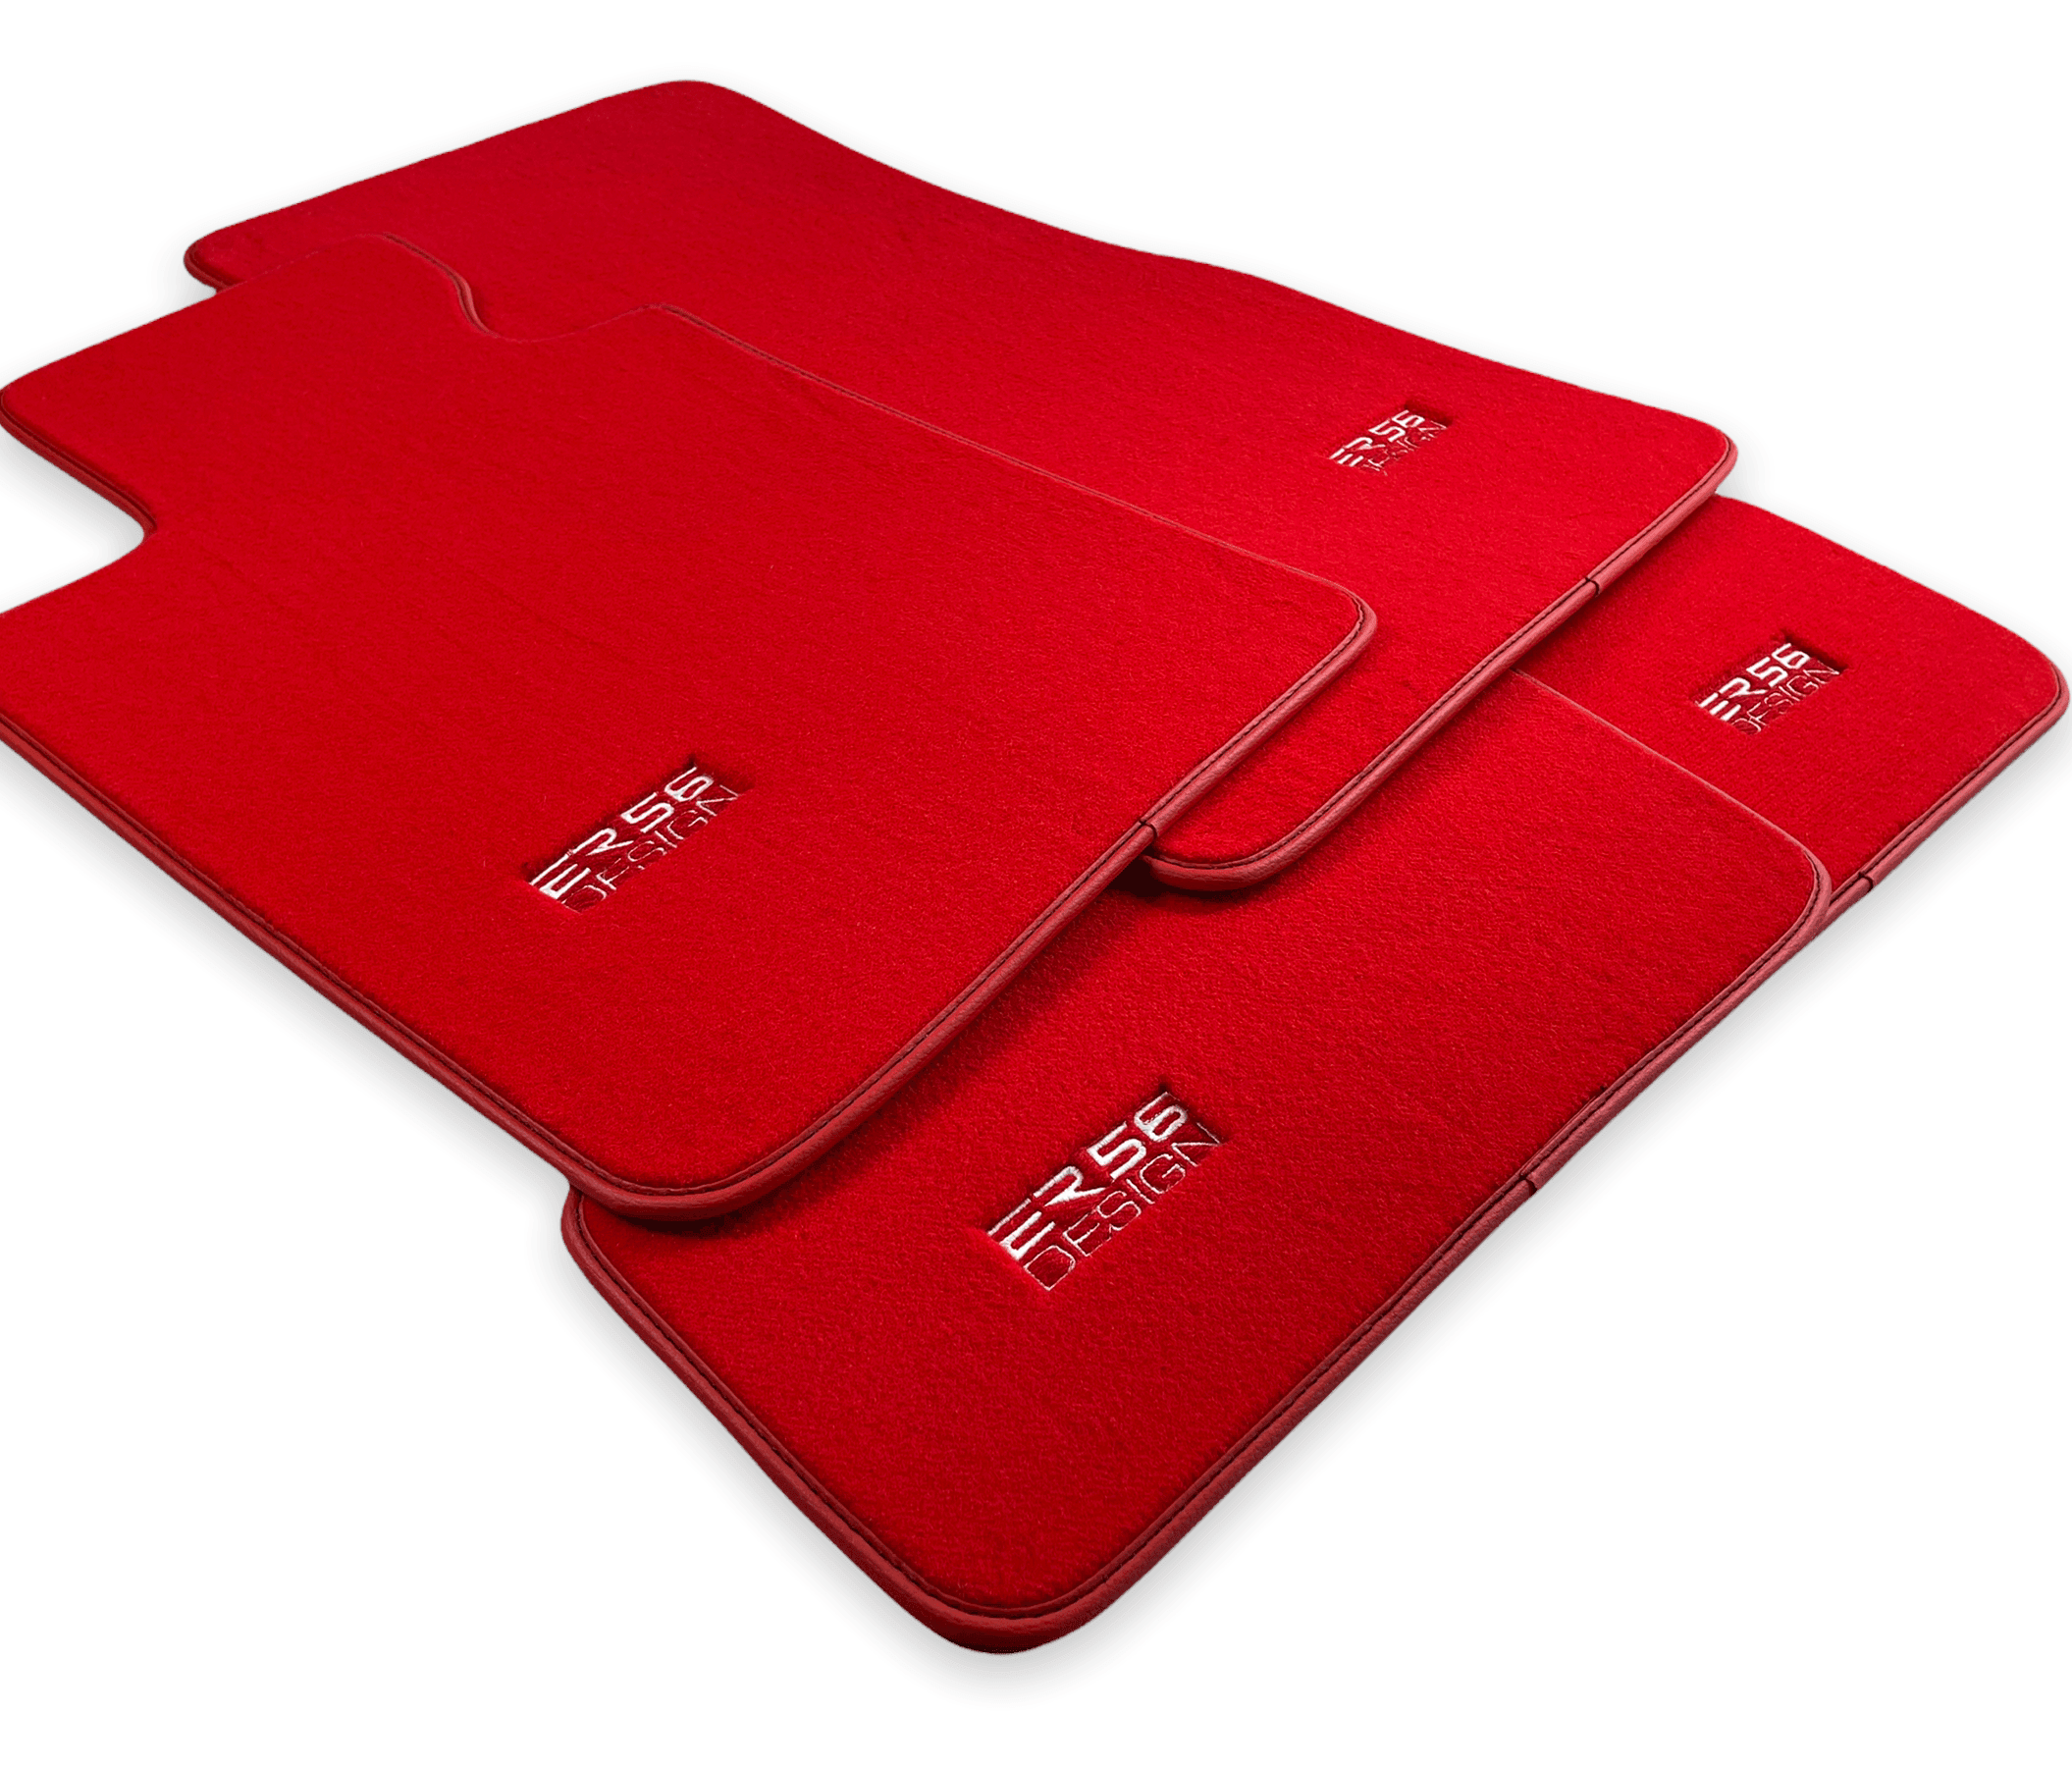 Red Mats For BMW 6 Series E24 Coupe - ER56 Design Brand - AutoWin